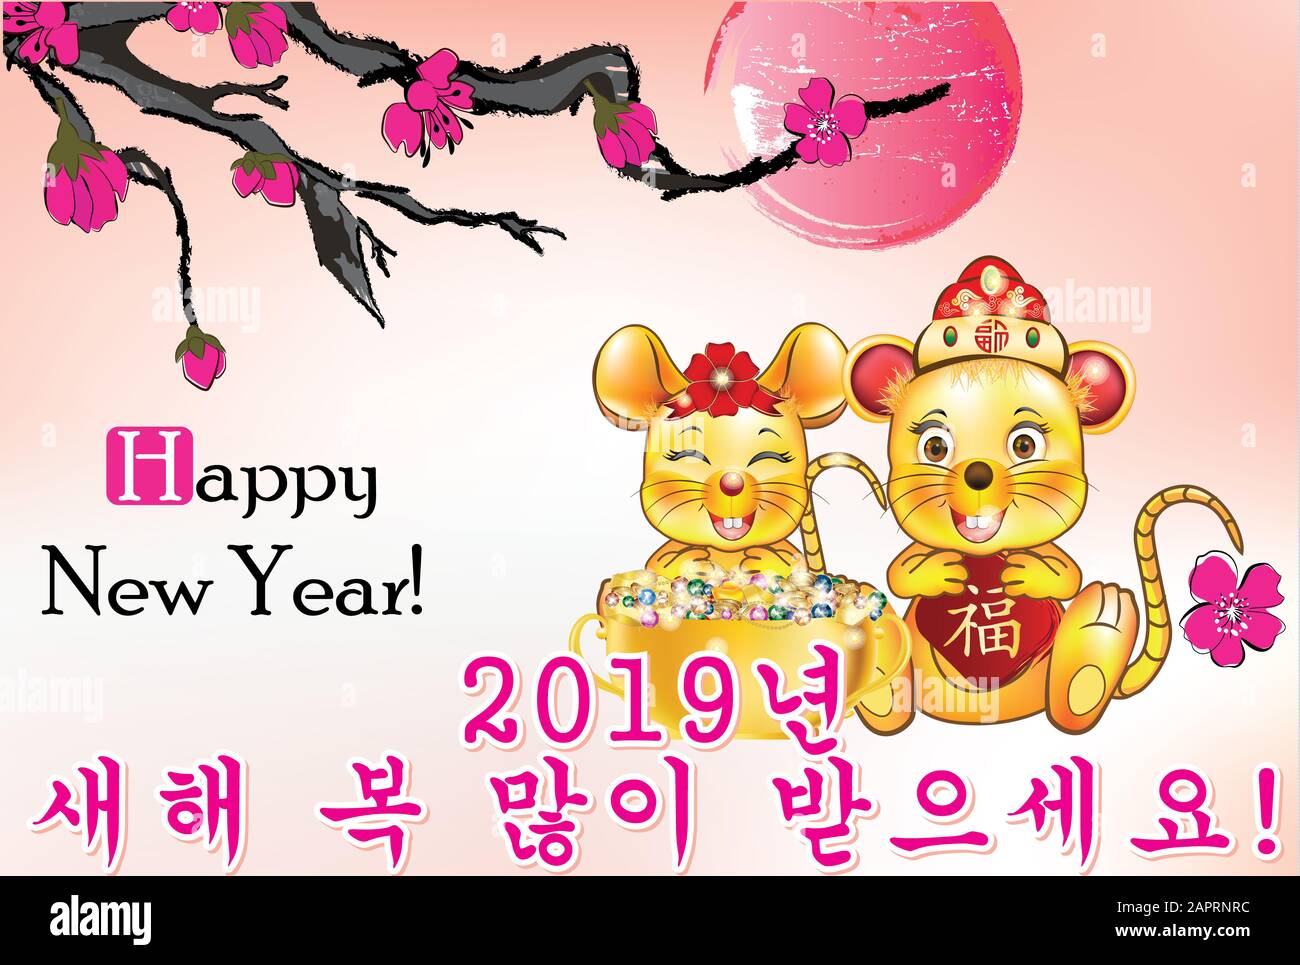 Korean greeting card for the New Year of the Rat 2020 celebration. The message (Happy New Year) is written in English and Korean. Stock Photo